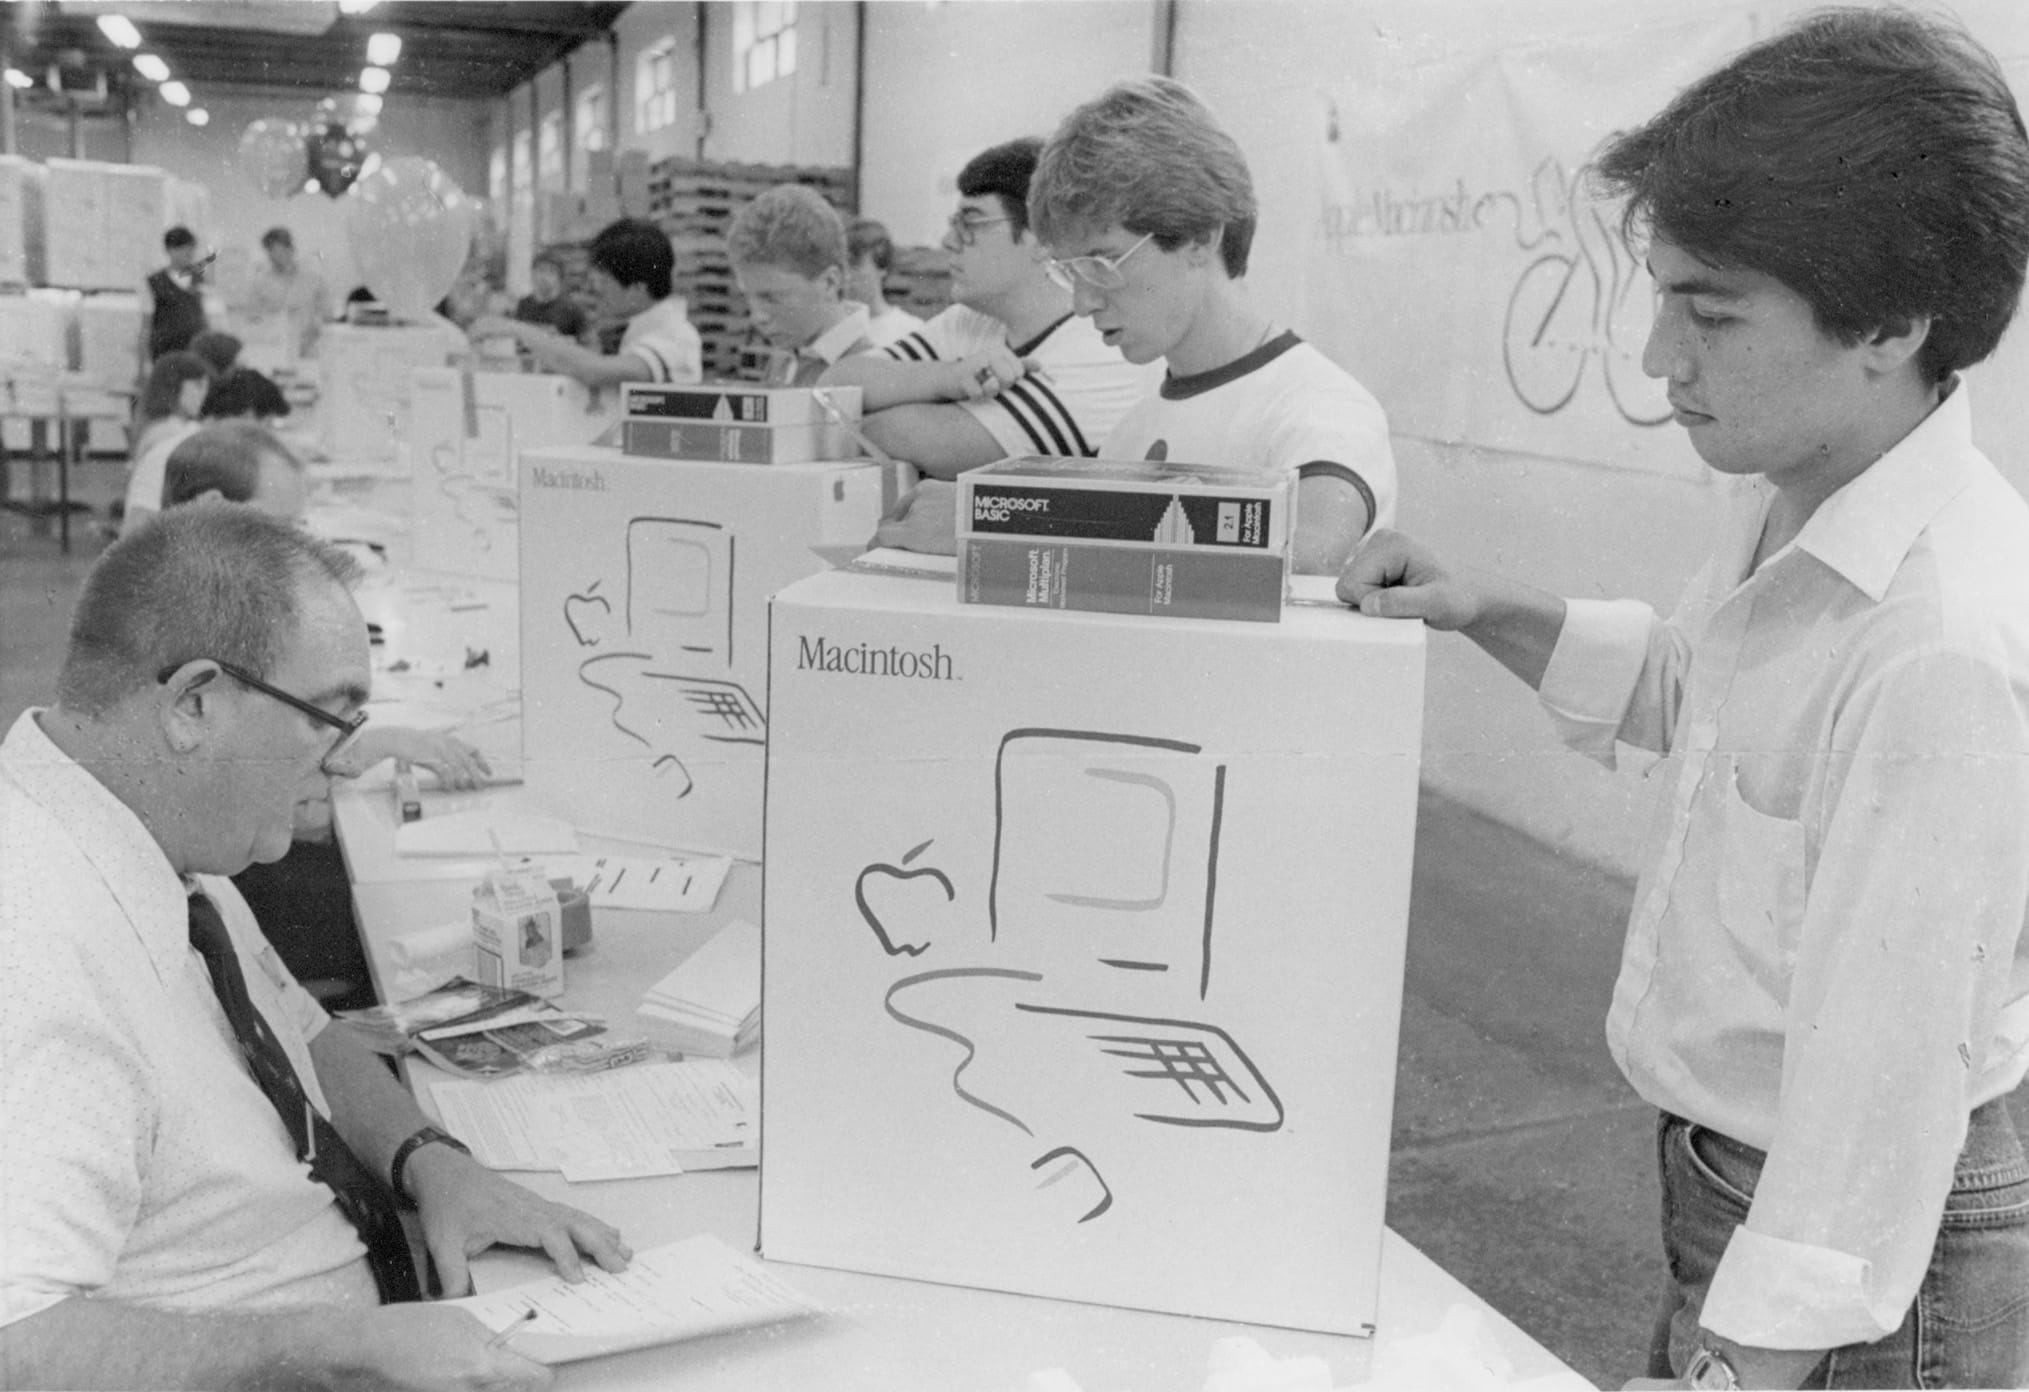 Students picking up the Macintosh package on a distribution day in March 1984. Photo courtesy Drexel University Archives.